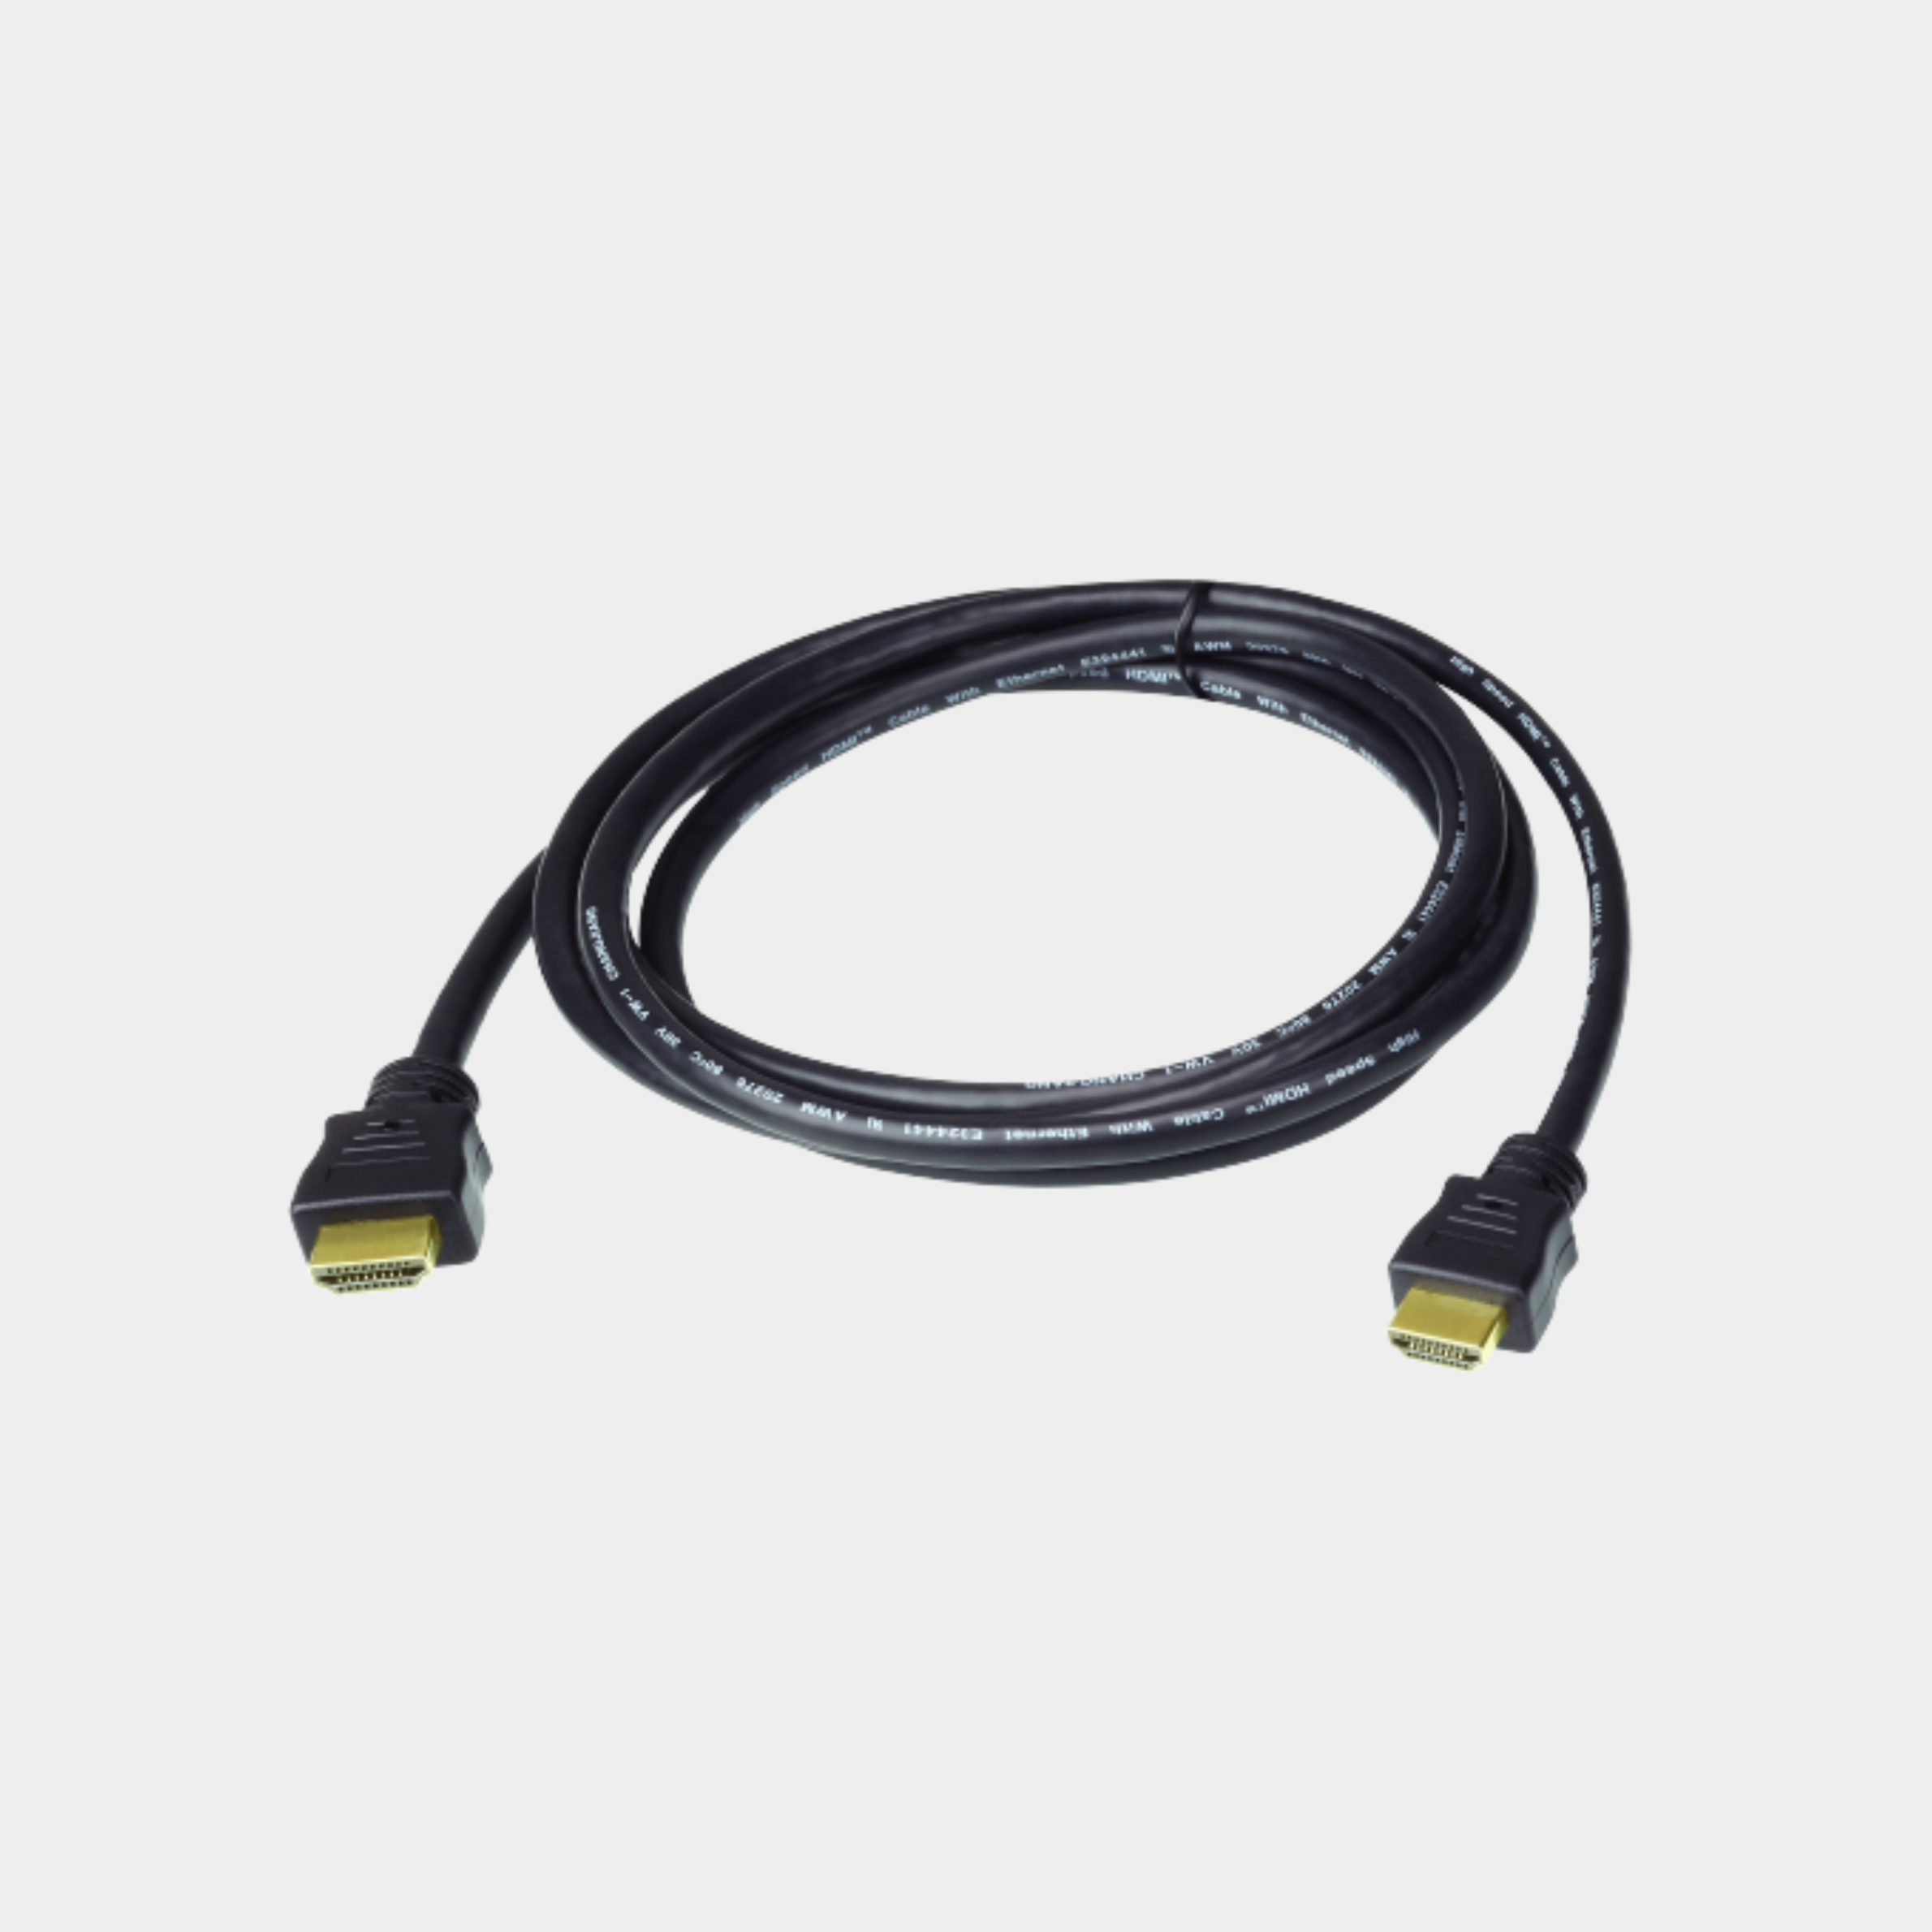 Aten 3 m High Speed True 4K HDMI Cable with Ethernet(ATEN 2L-7D03H)